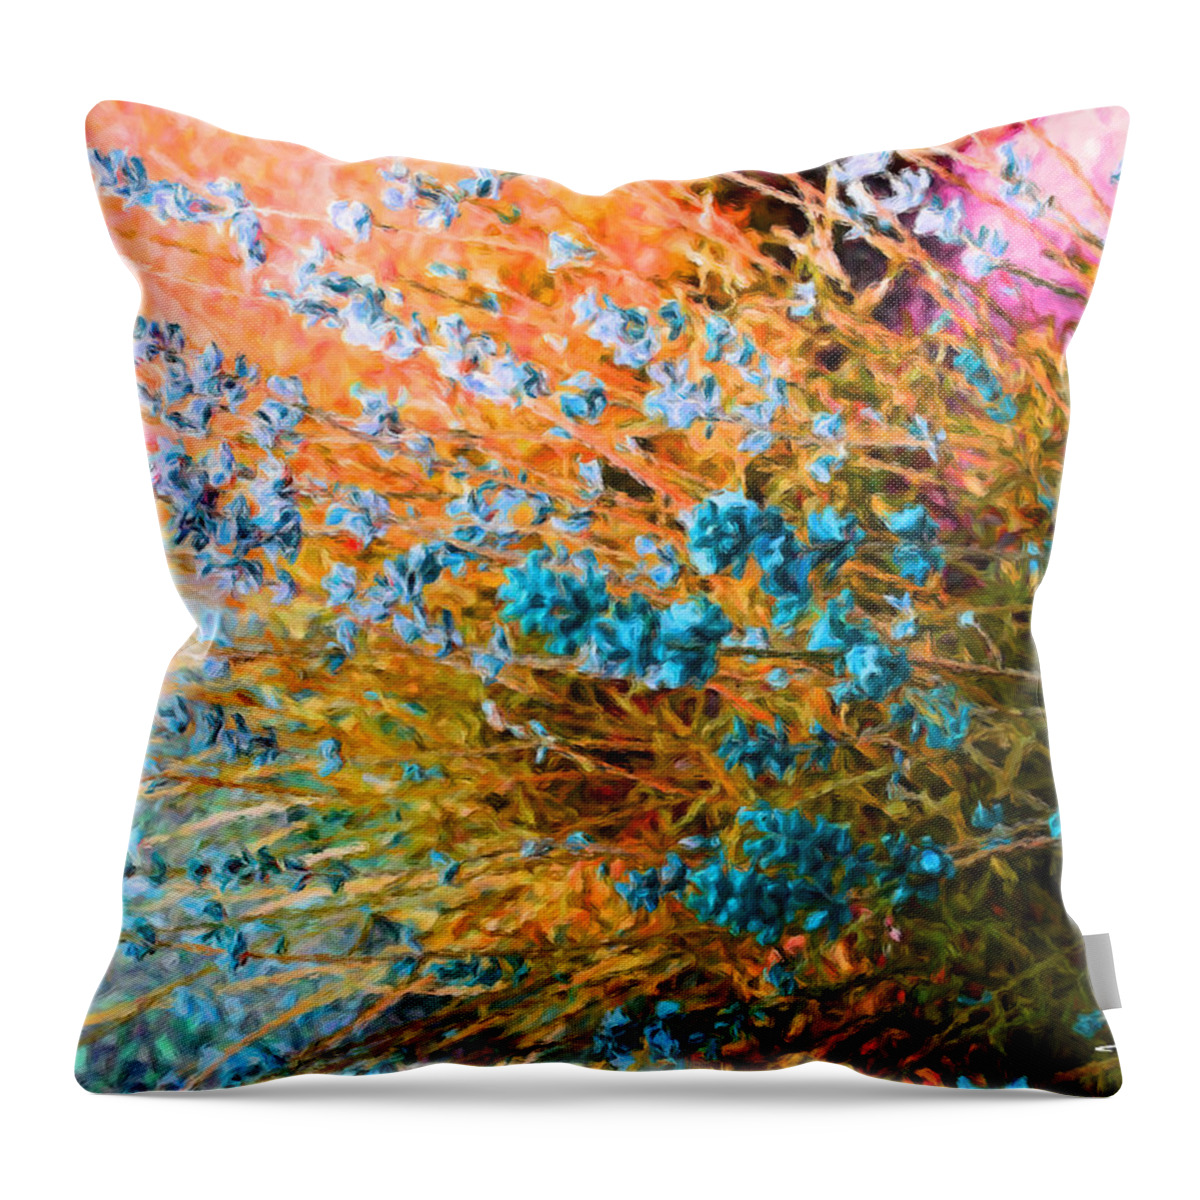 Floral Art Throw Pillow featuring the painting Carmela Laino by Trask Ferrero